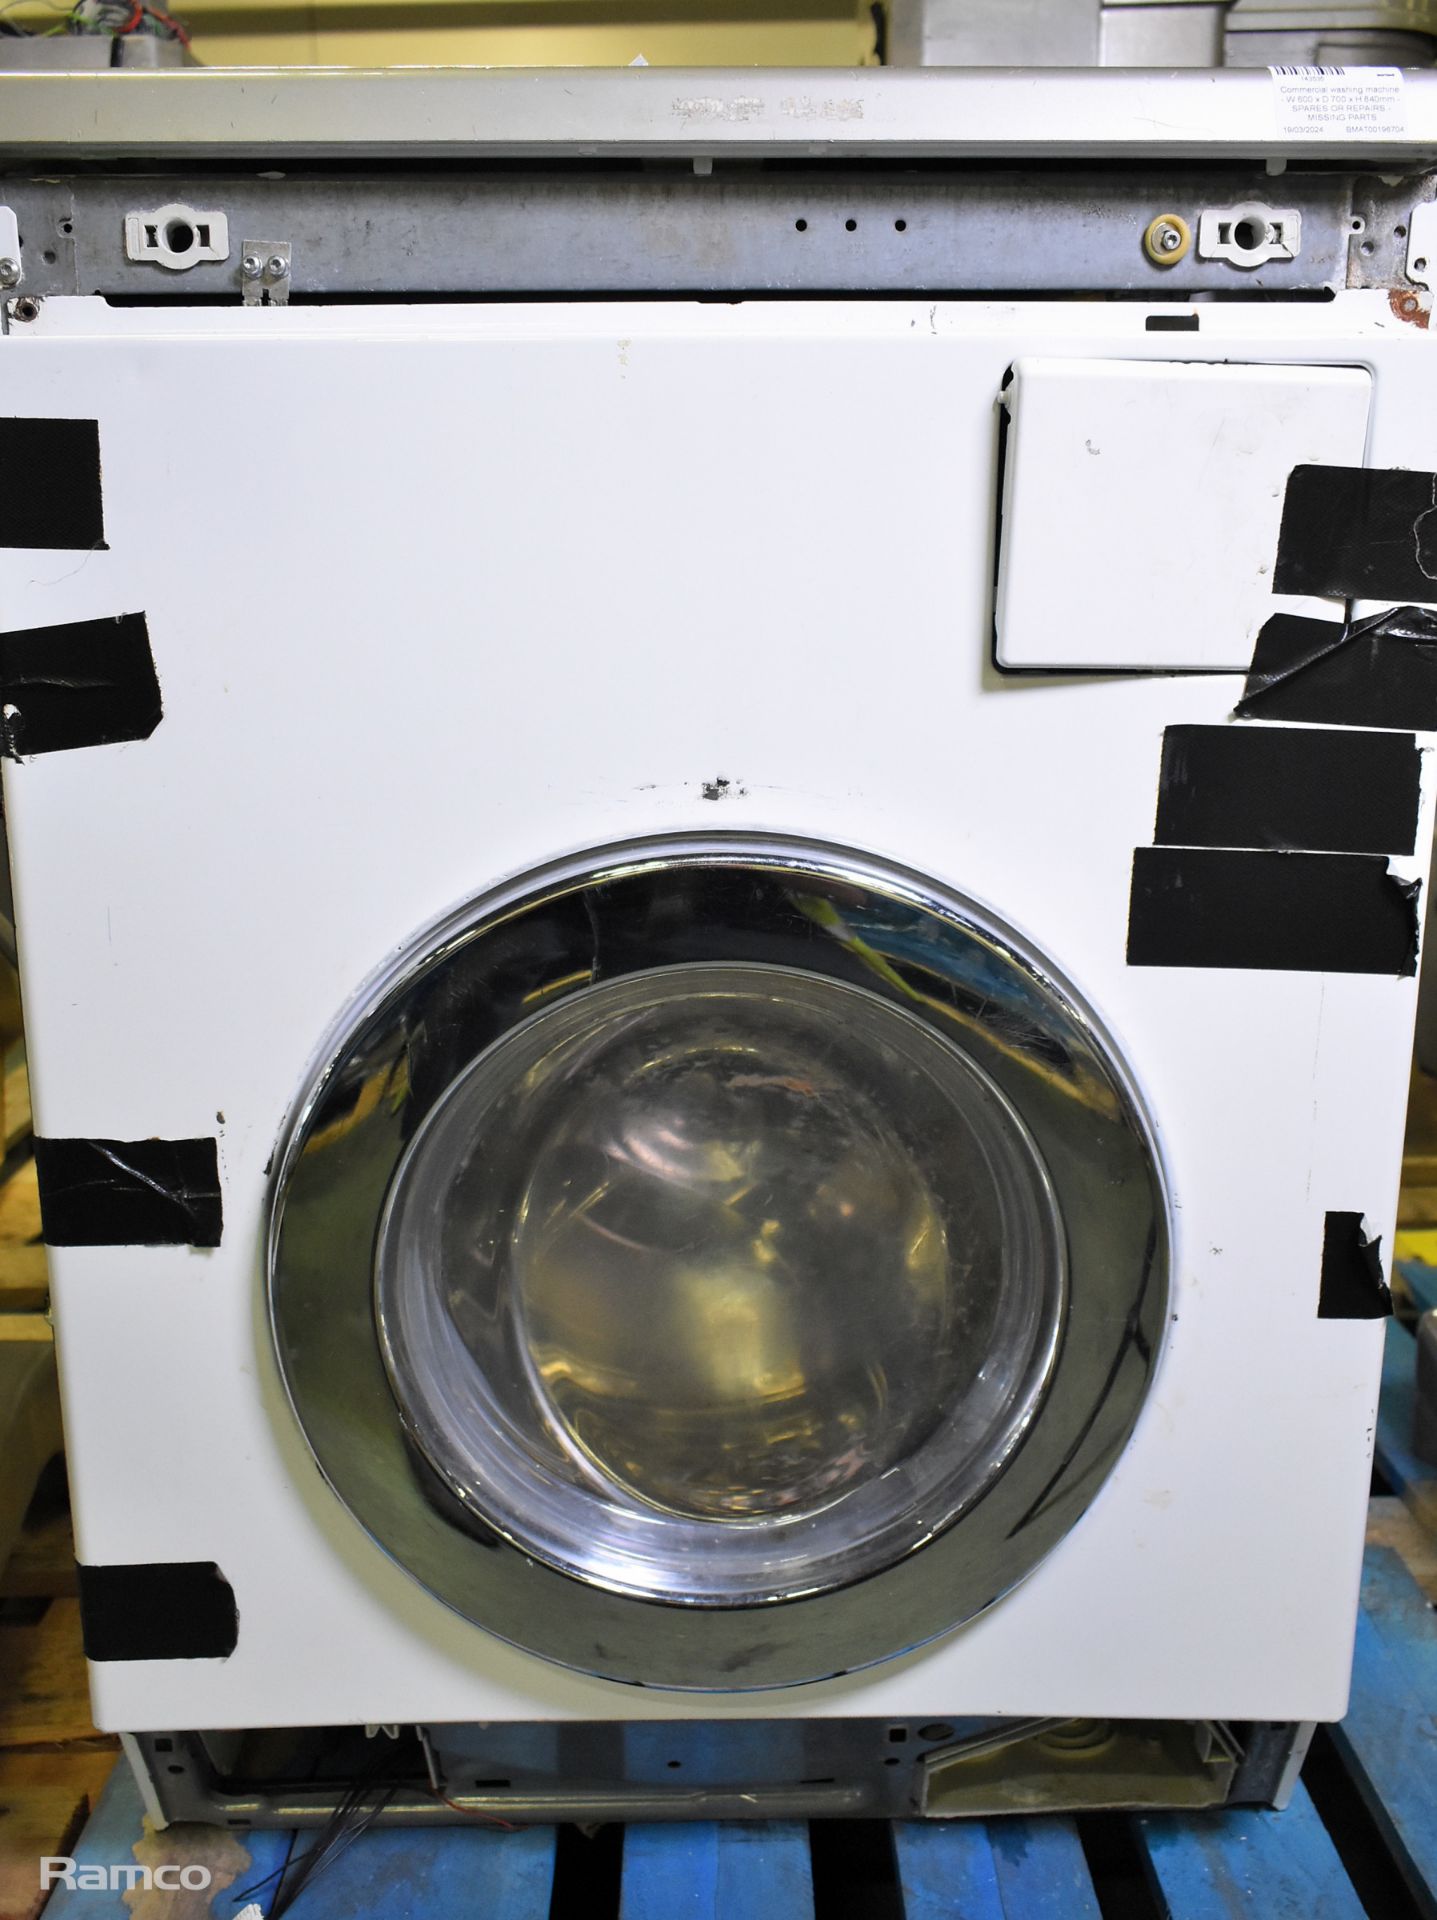 Commercial washing machine - W 600 x D 700 x H 840mm - SPARES OR REPAIRS - MISSING PARTS - Image 3 of 4